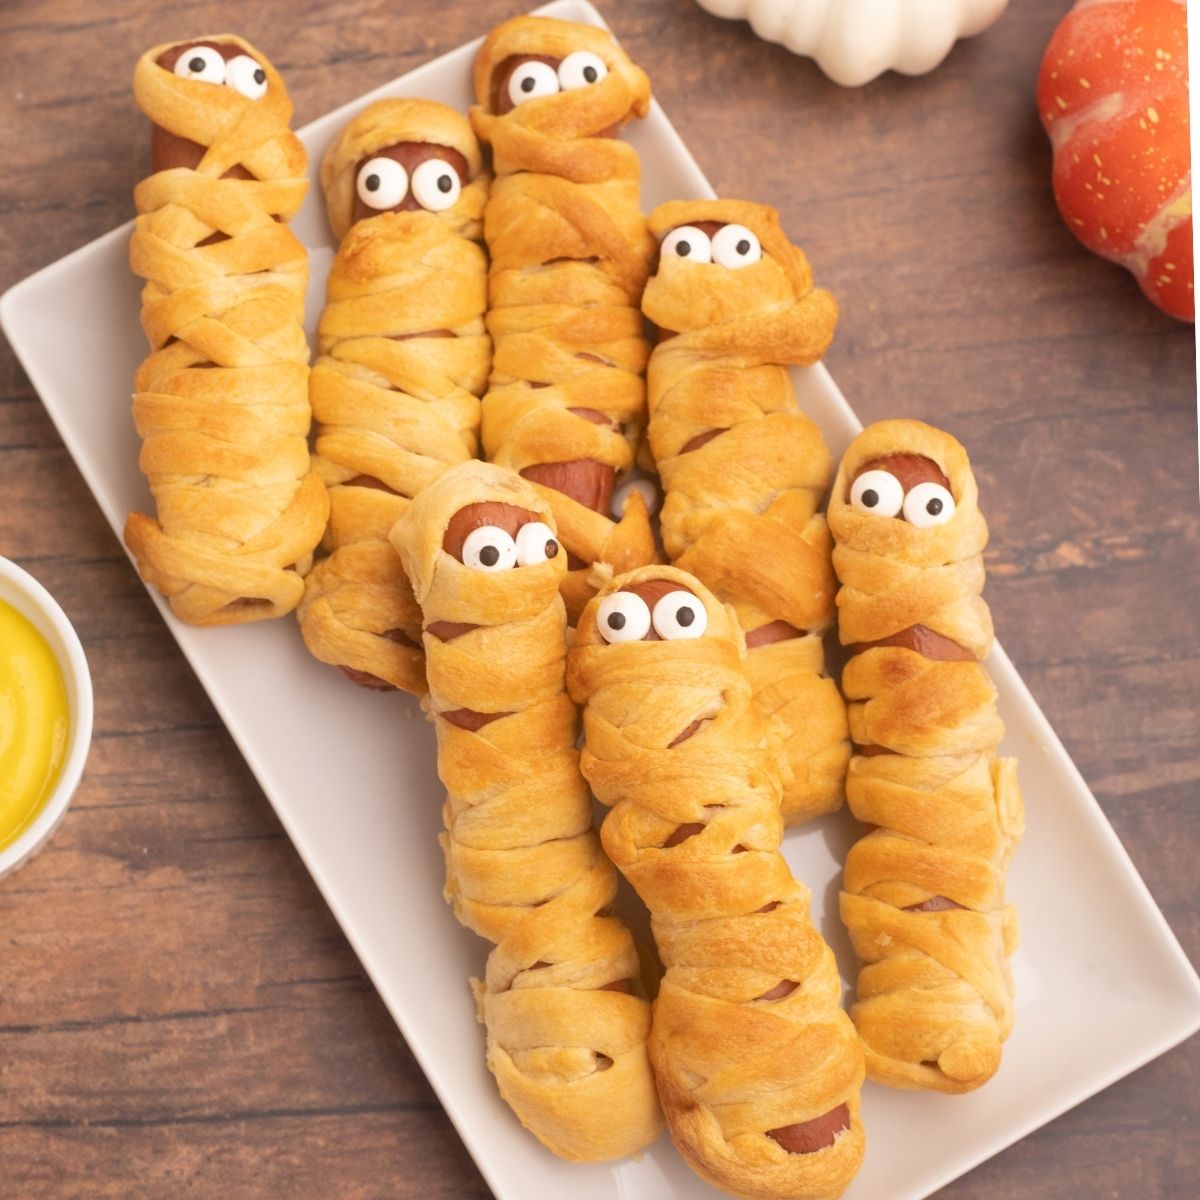 Golden crusted and wrapped hot dogs, to look like mummies with candy eyes